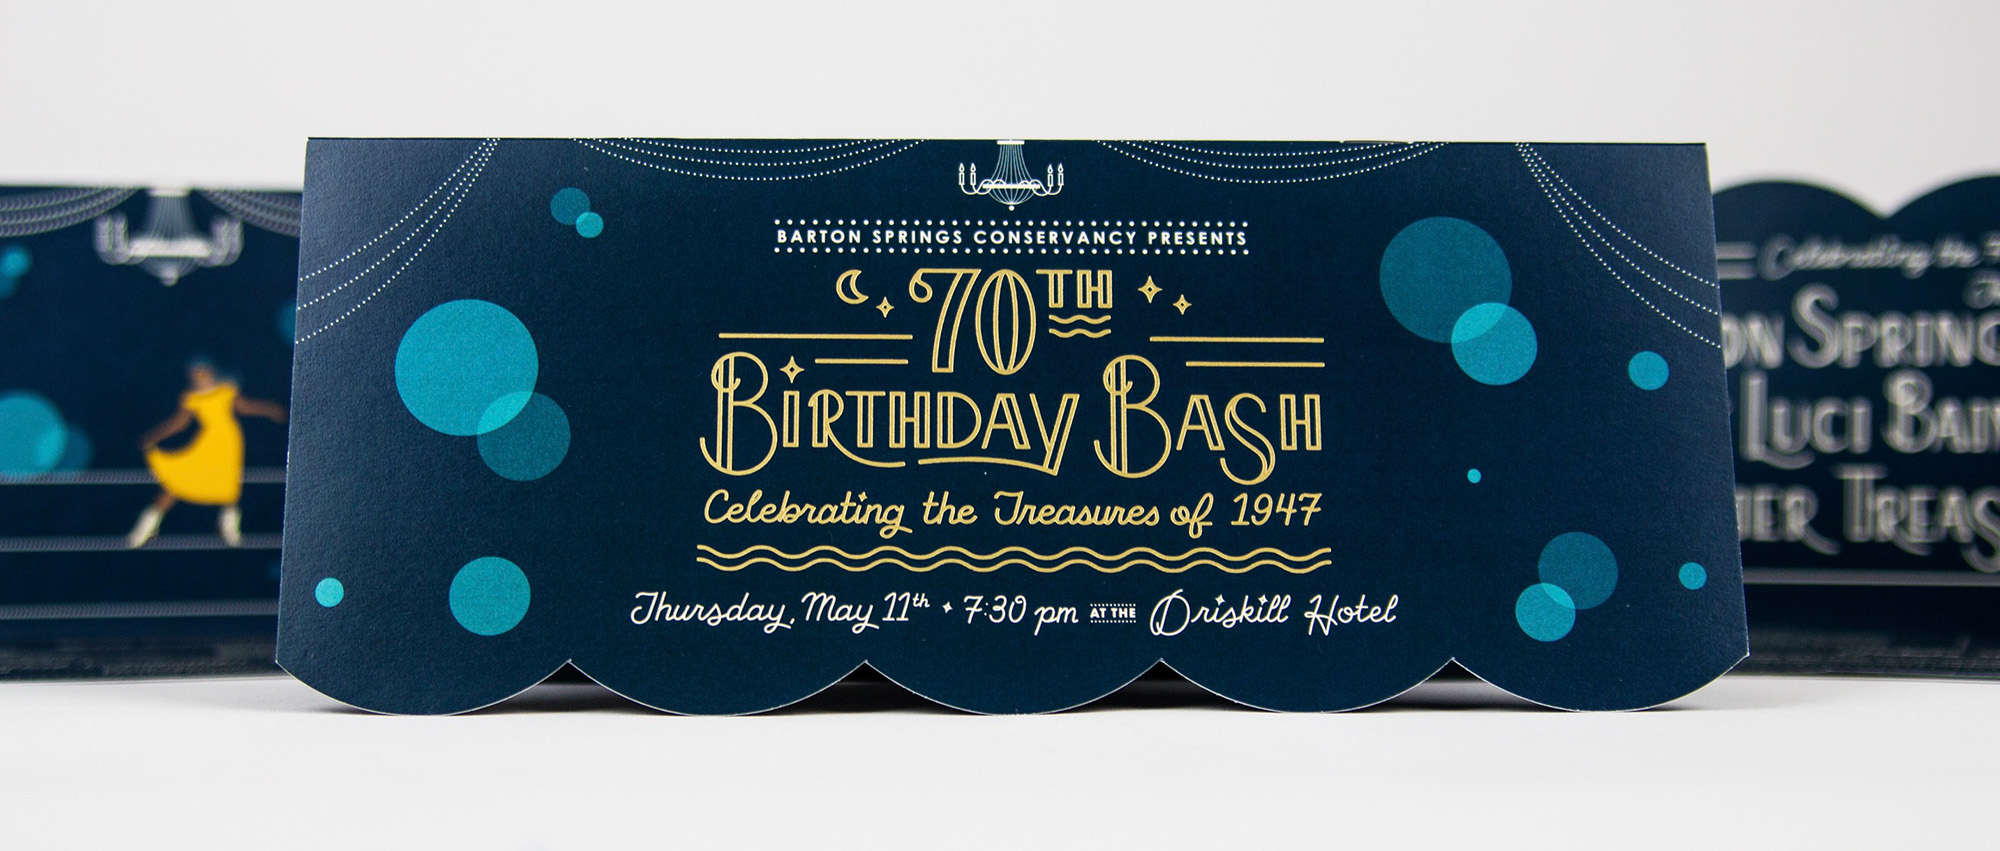 a party invitation for the 70th birthday bash for Barton Springs Conservancy